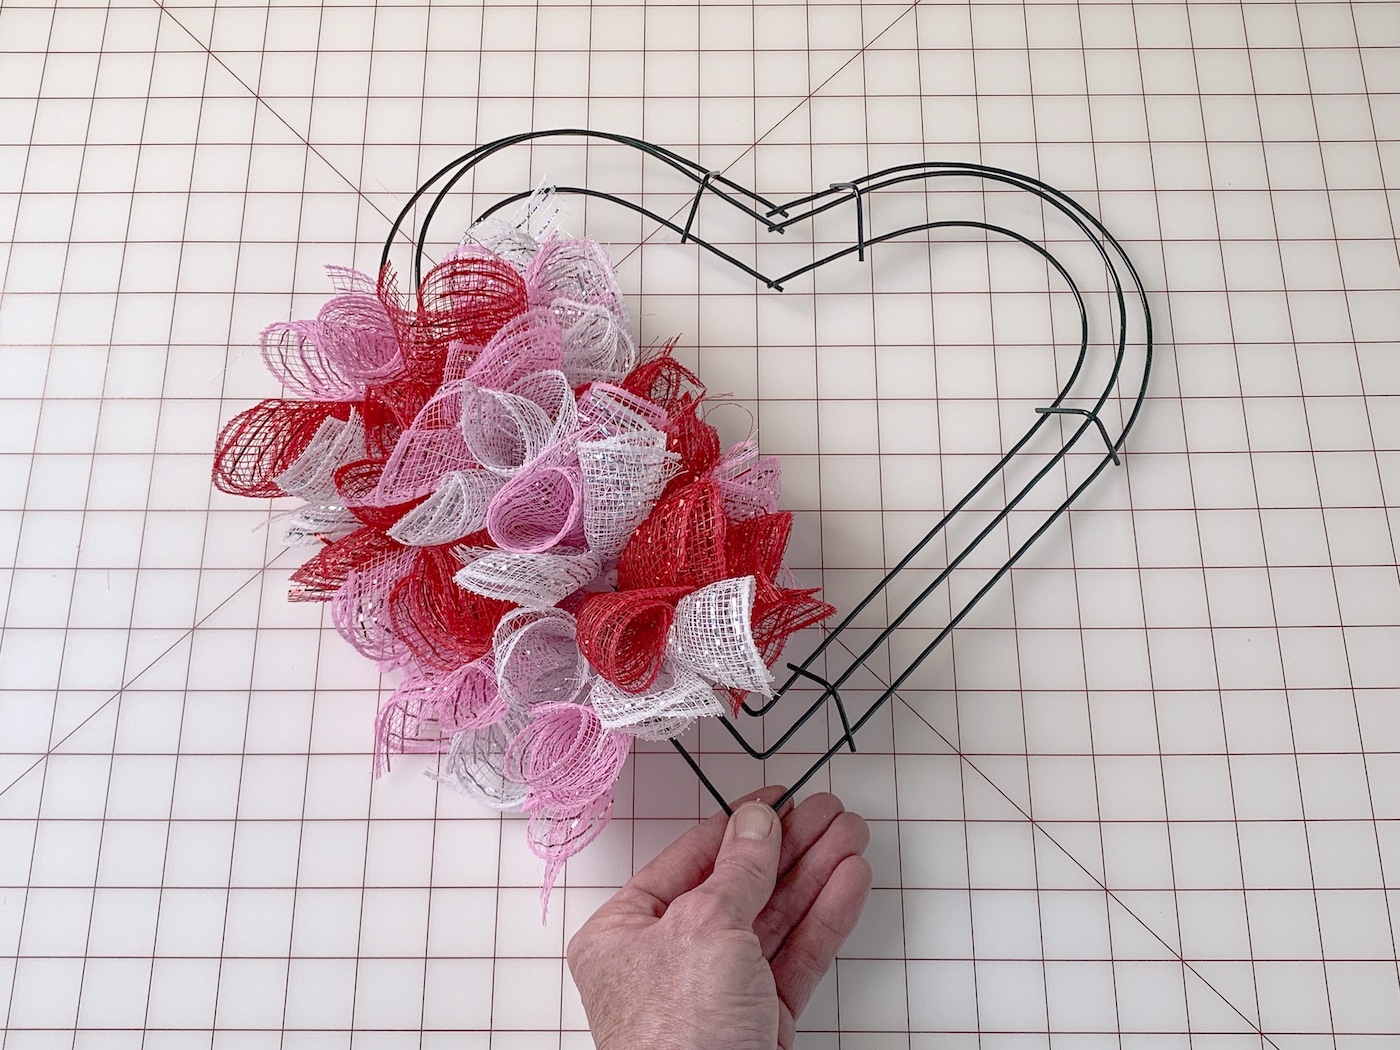 Heart shaped wreath form partially covered in deco mesh